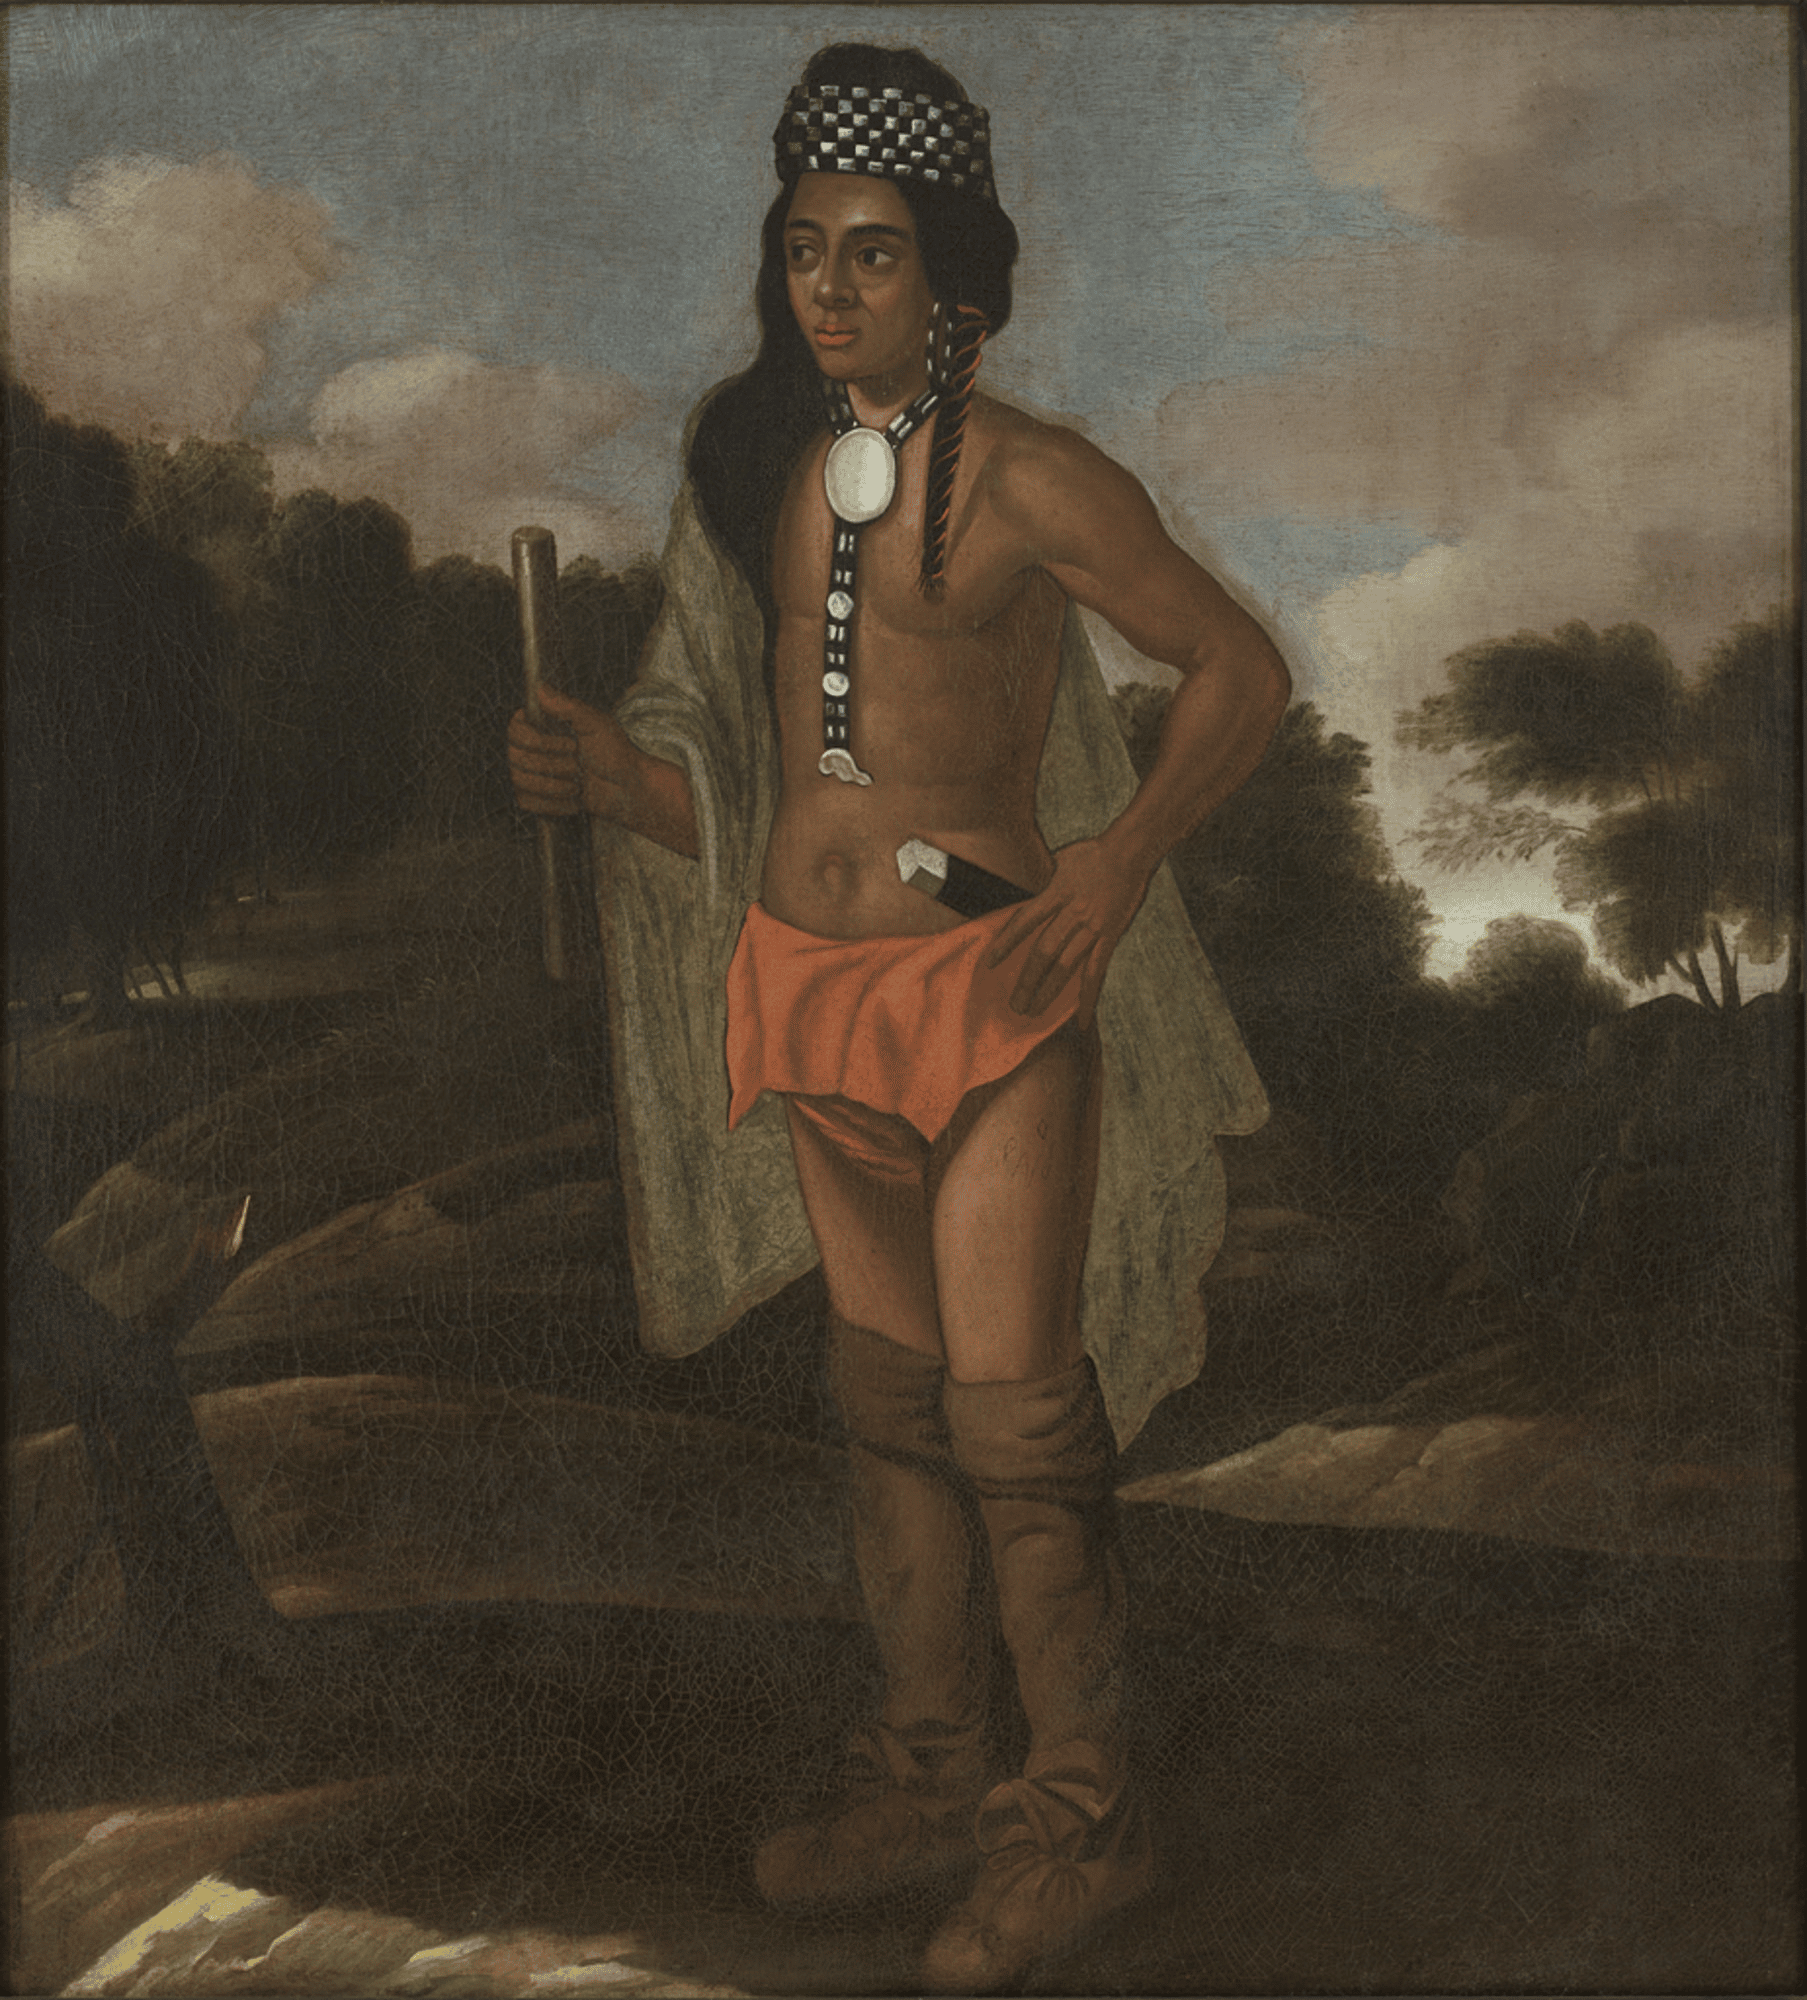 The Fremont Indians were the earliest peoples to inhabit what is today Great Basin National Park